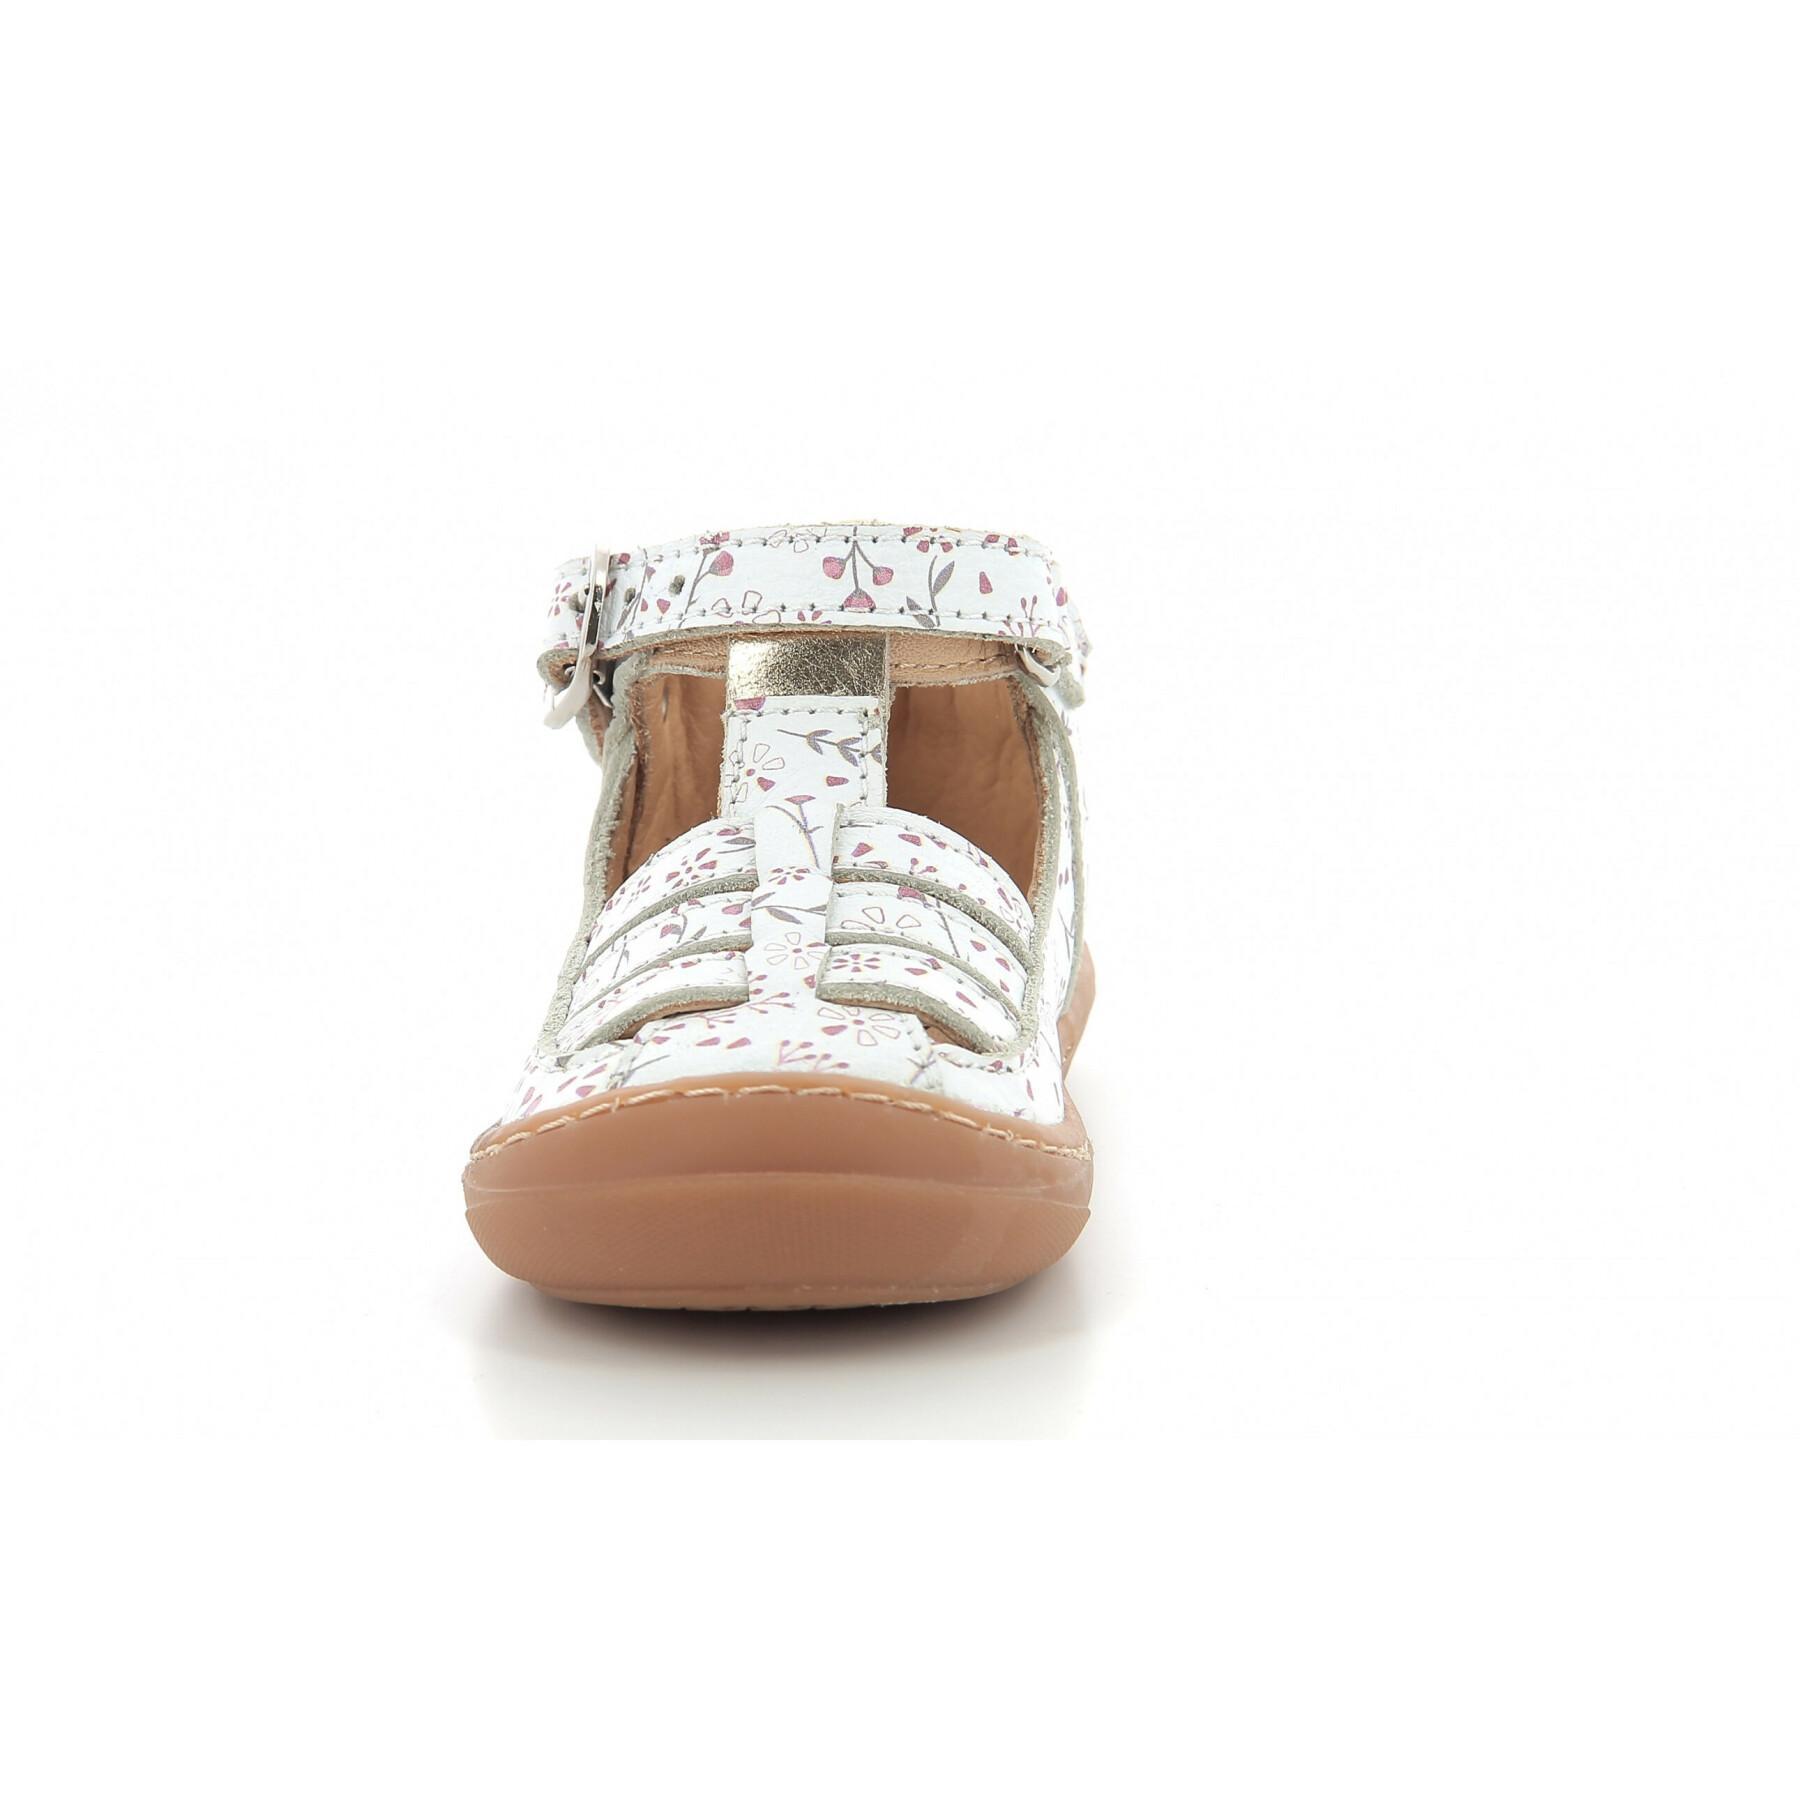 Baby girl sandals Aster Crusile